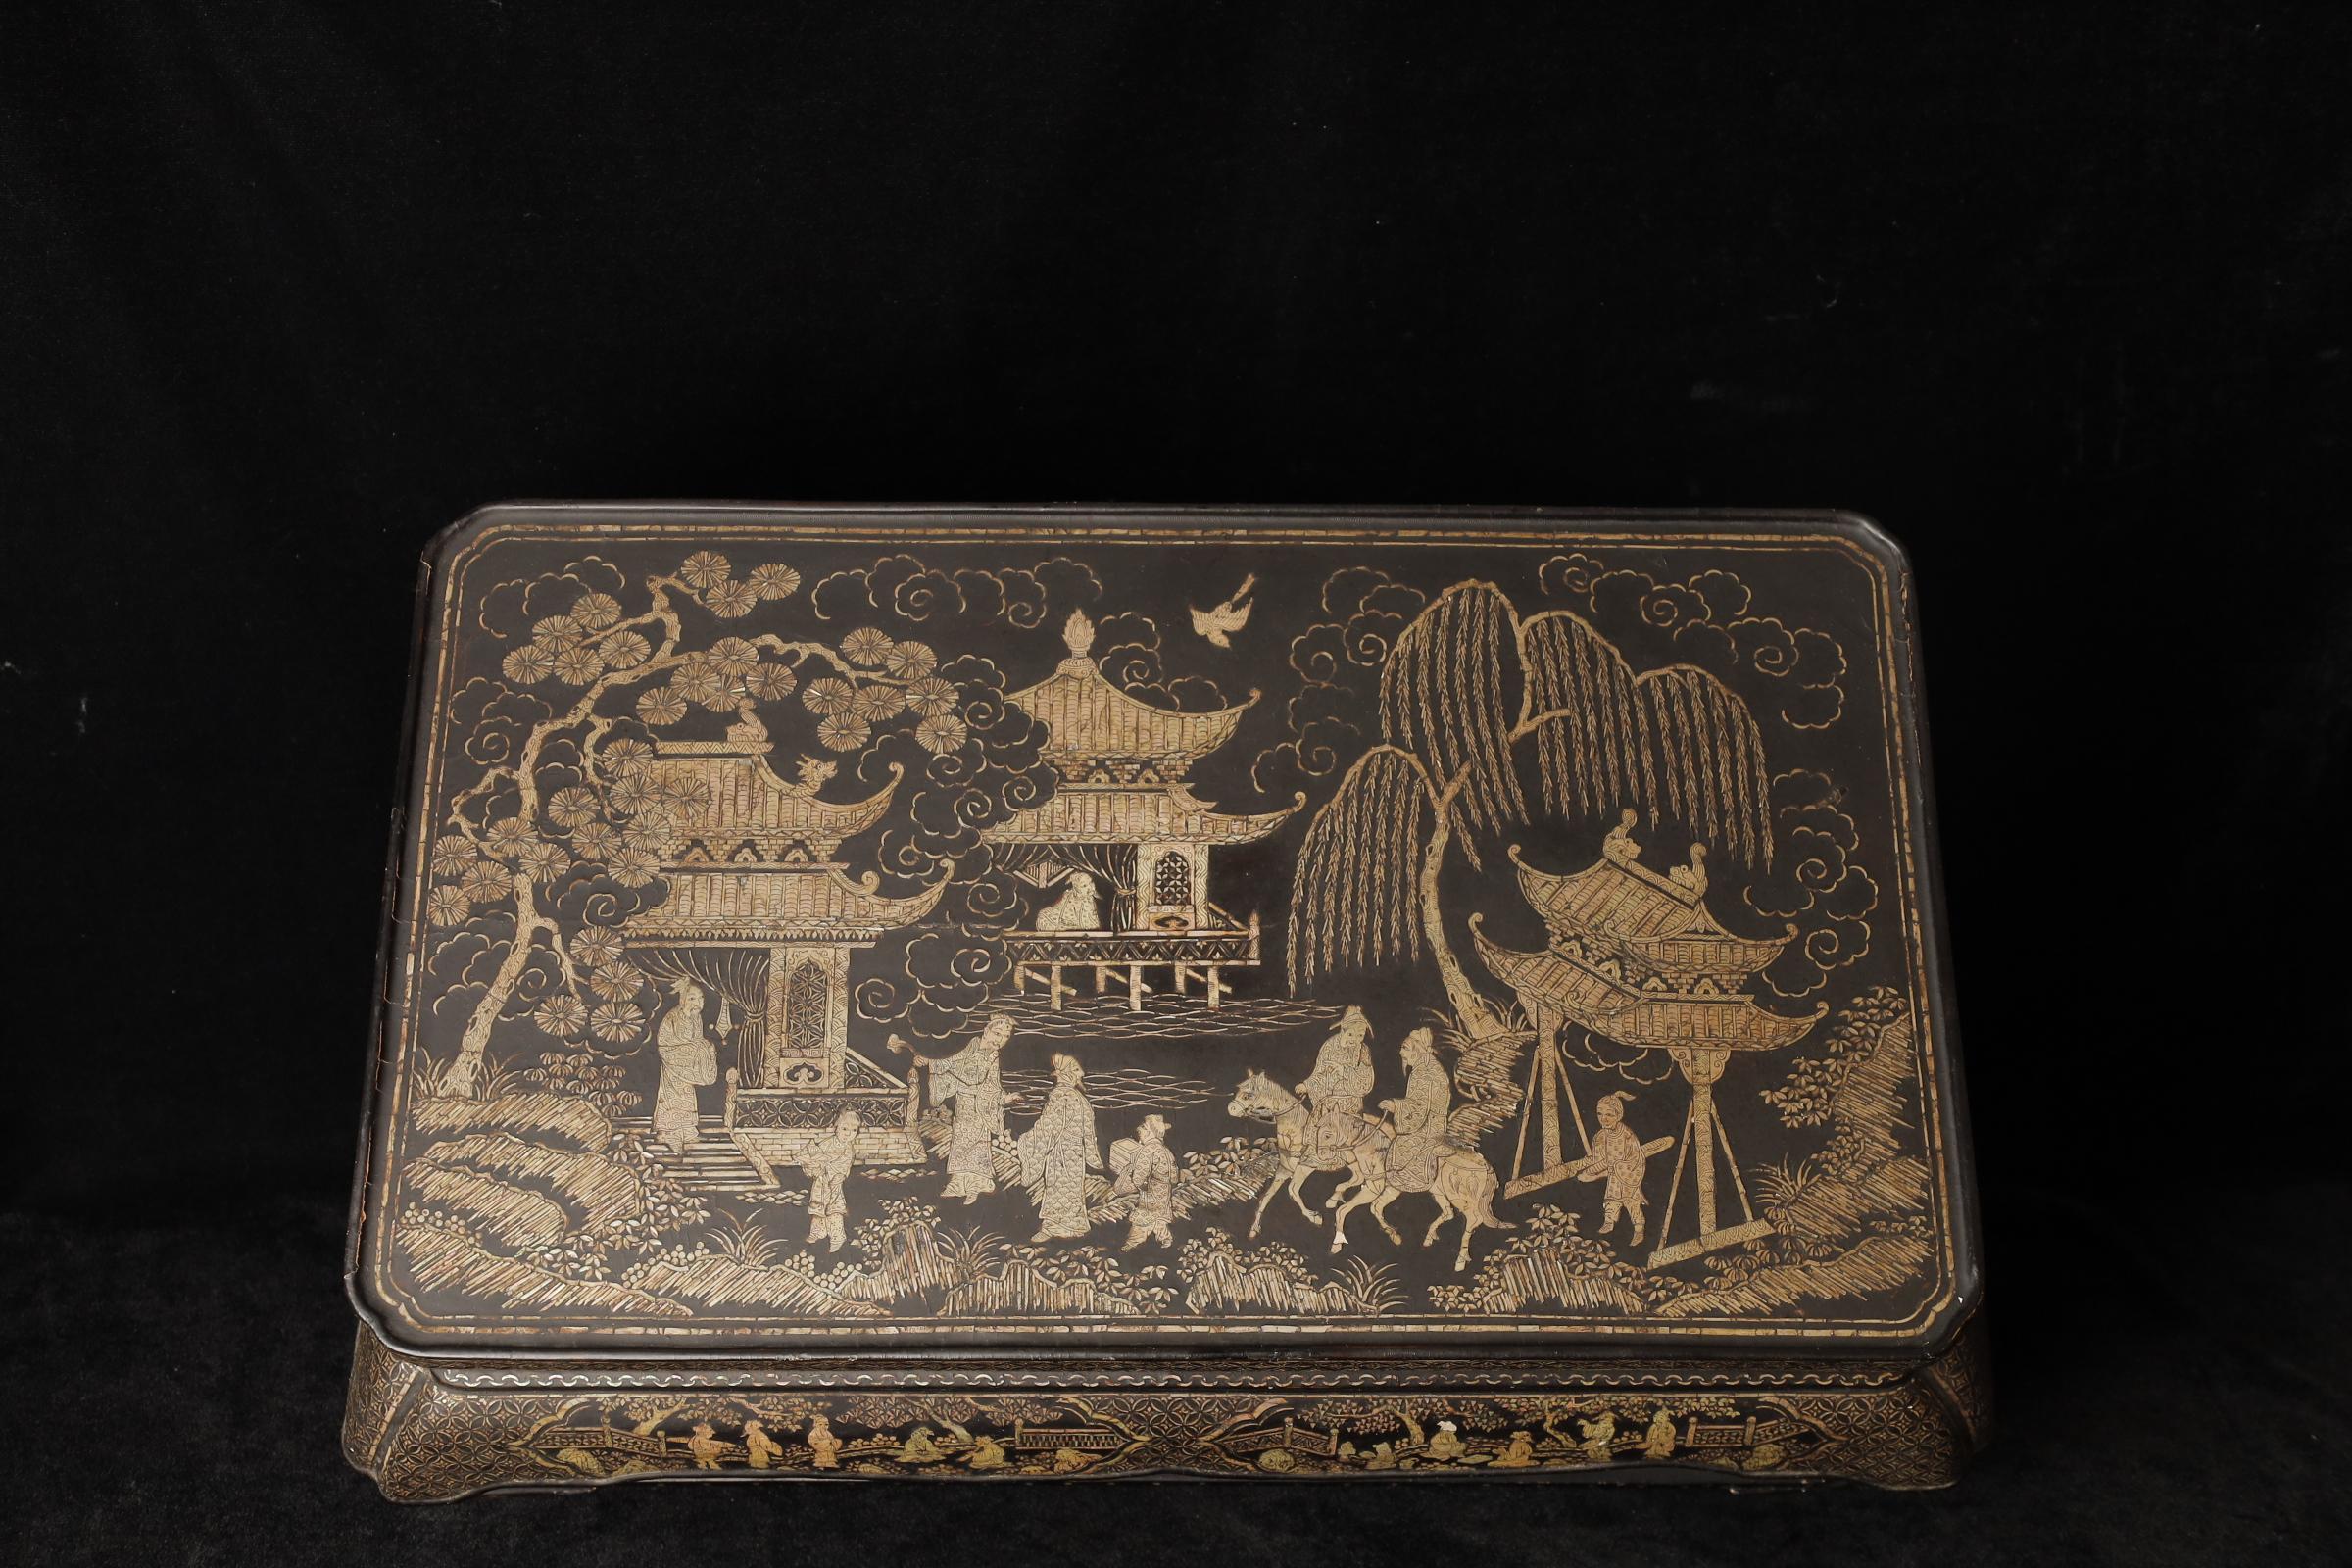 Japanese Ming Dynasty Period Scholar's Garden: Mother-of-Pearl Inlaid Lacquer Kang Table For Sale